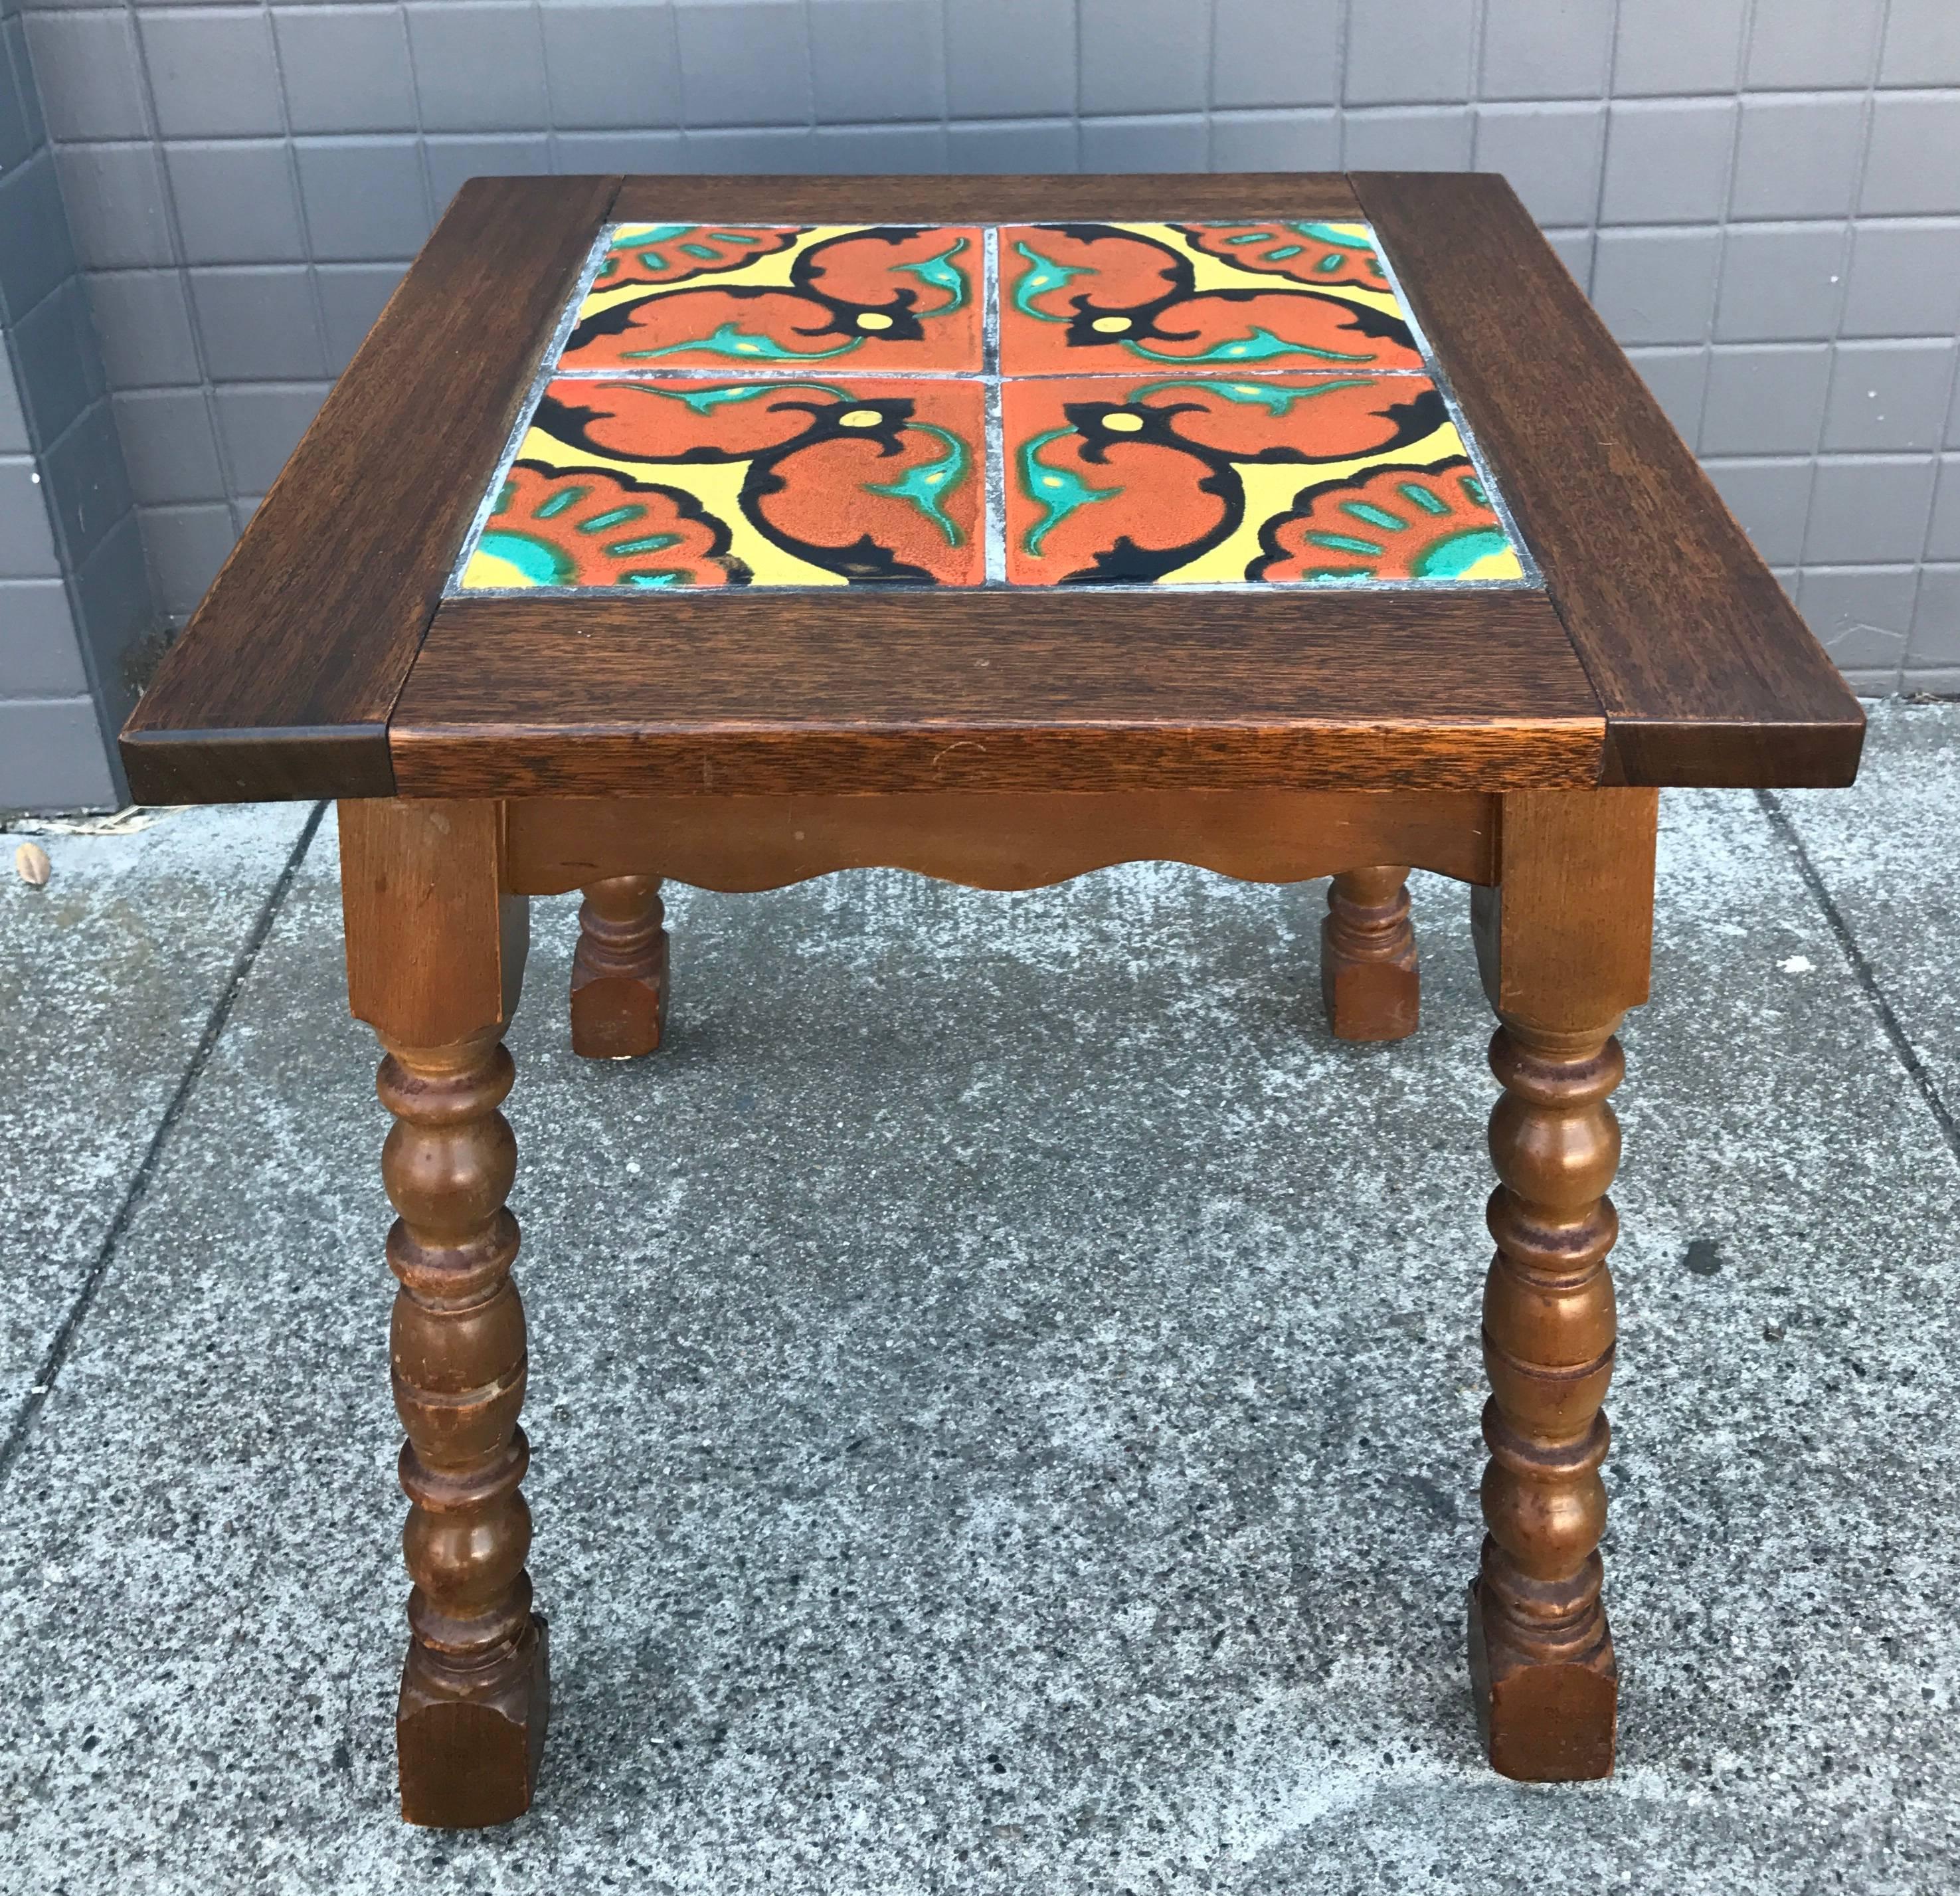 A delightful small mahogany side or occasional table with Spanish-influenced tile top by California designer and artist Taylor Tilery.

Festive four tile design features five glossy glaze colors, unlike his Moorish designs which only used three.